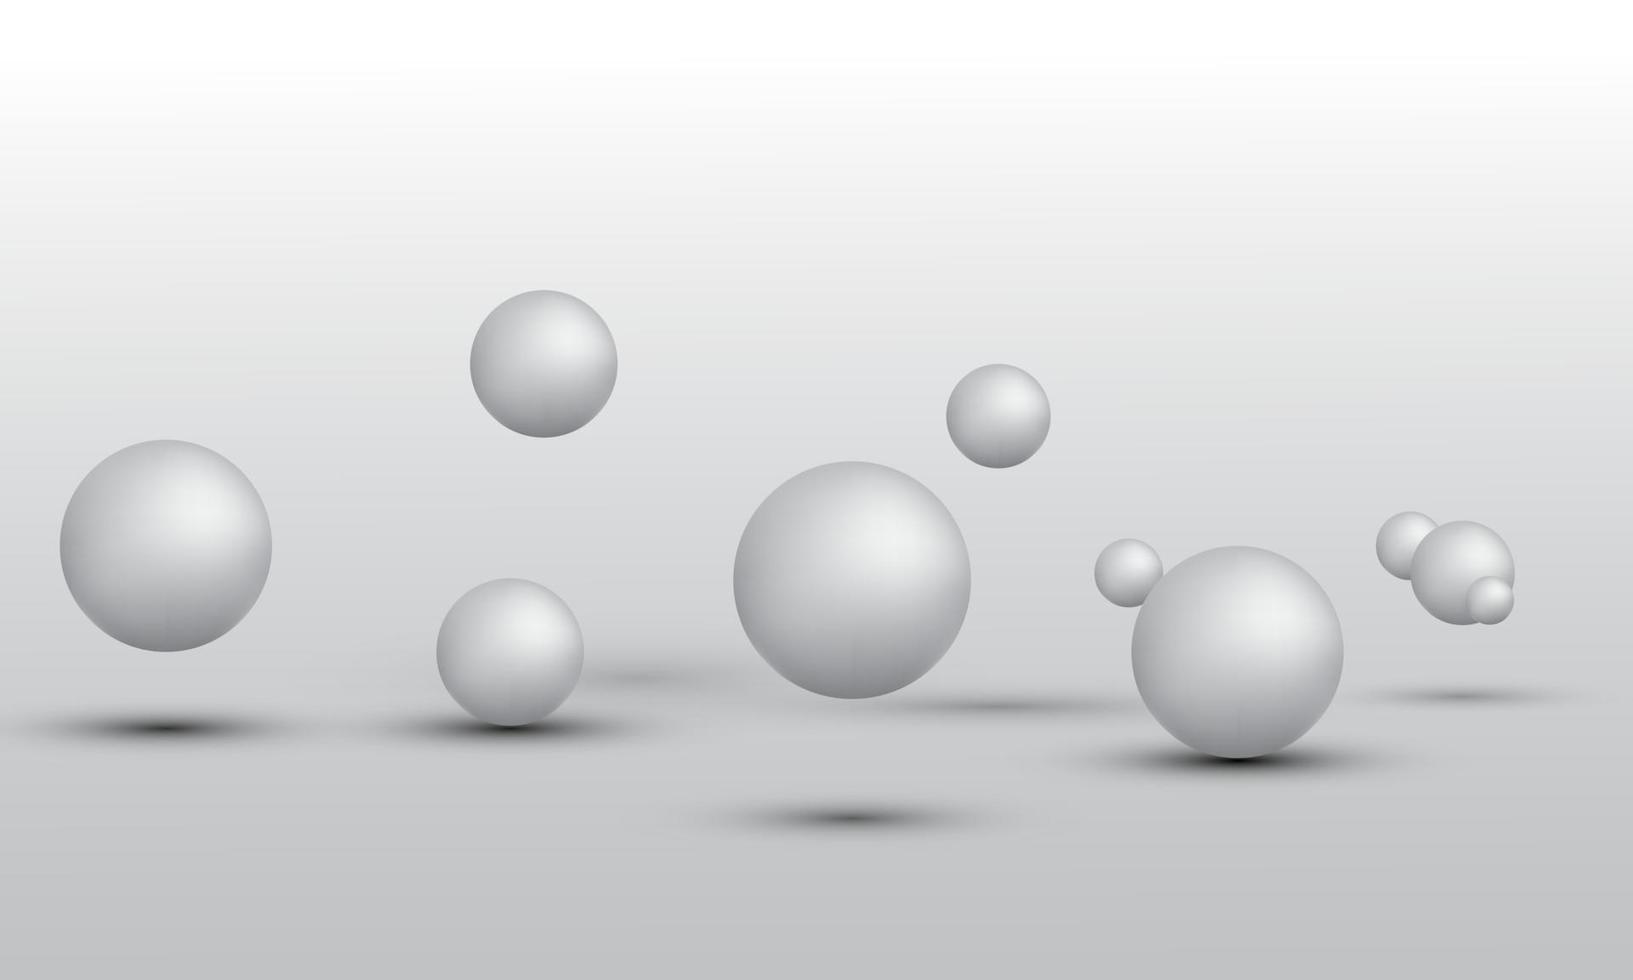 3D illustration of balls of different sizes hanging in space. 3D rendering isolated on white background. vector